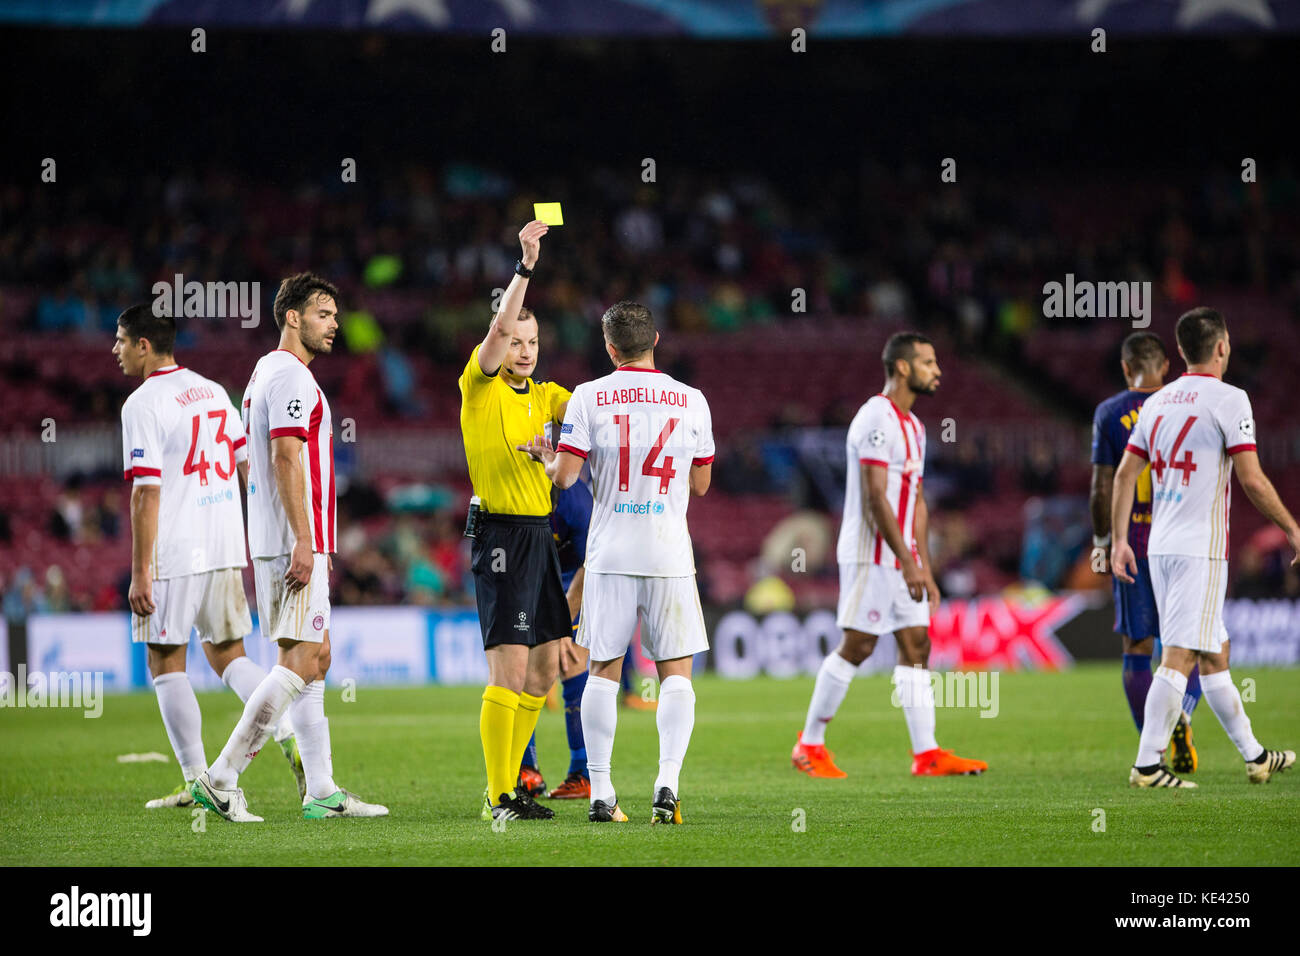 SPAIN - 18th of October: The referee, William Collum shows the yellow card to Omar Elabdellaoui during the match between FC Barcelona against Olympiacos, for the round 3 of the Liga Santander, played at Camp Nou Stadium on 18th October 2017 in Barcelona, Spain. (Credit: Urbanandsport/Gtres Online) Credit: Gtres Información más Comuniación on line, S.L./Alamy Live News Stock Photo